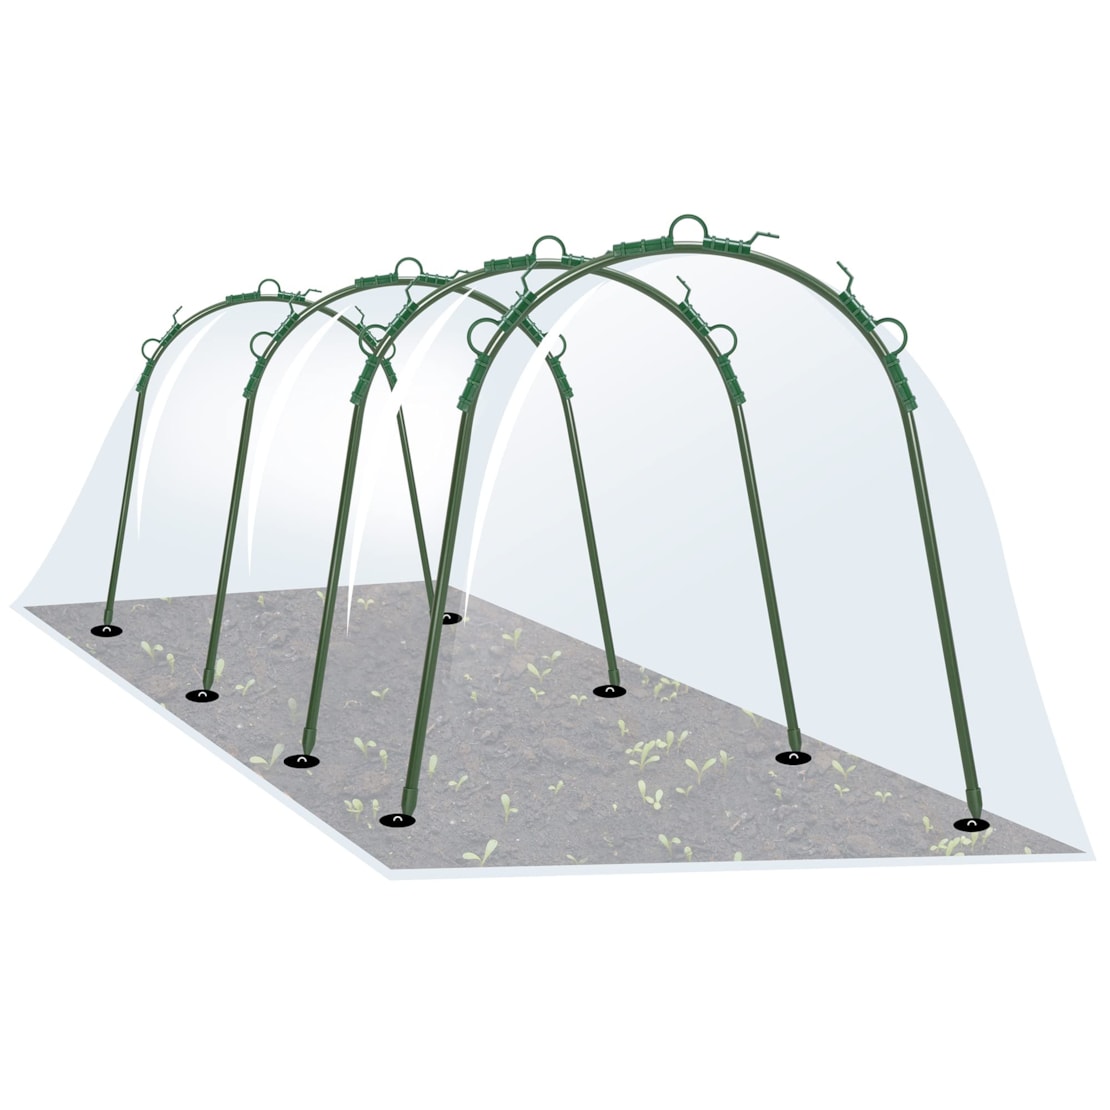 VIVOSUN 4Pcs 5ft Greenhouse Hoops with PE Cover, Rust-Free Grow Tunnel Tunnel, 5ft Long Steel with Plastic Coated Plant Supports for Garden Fabric, Plant Support Garden Stakes